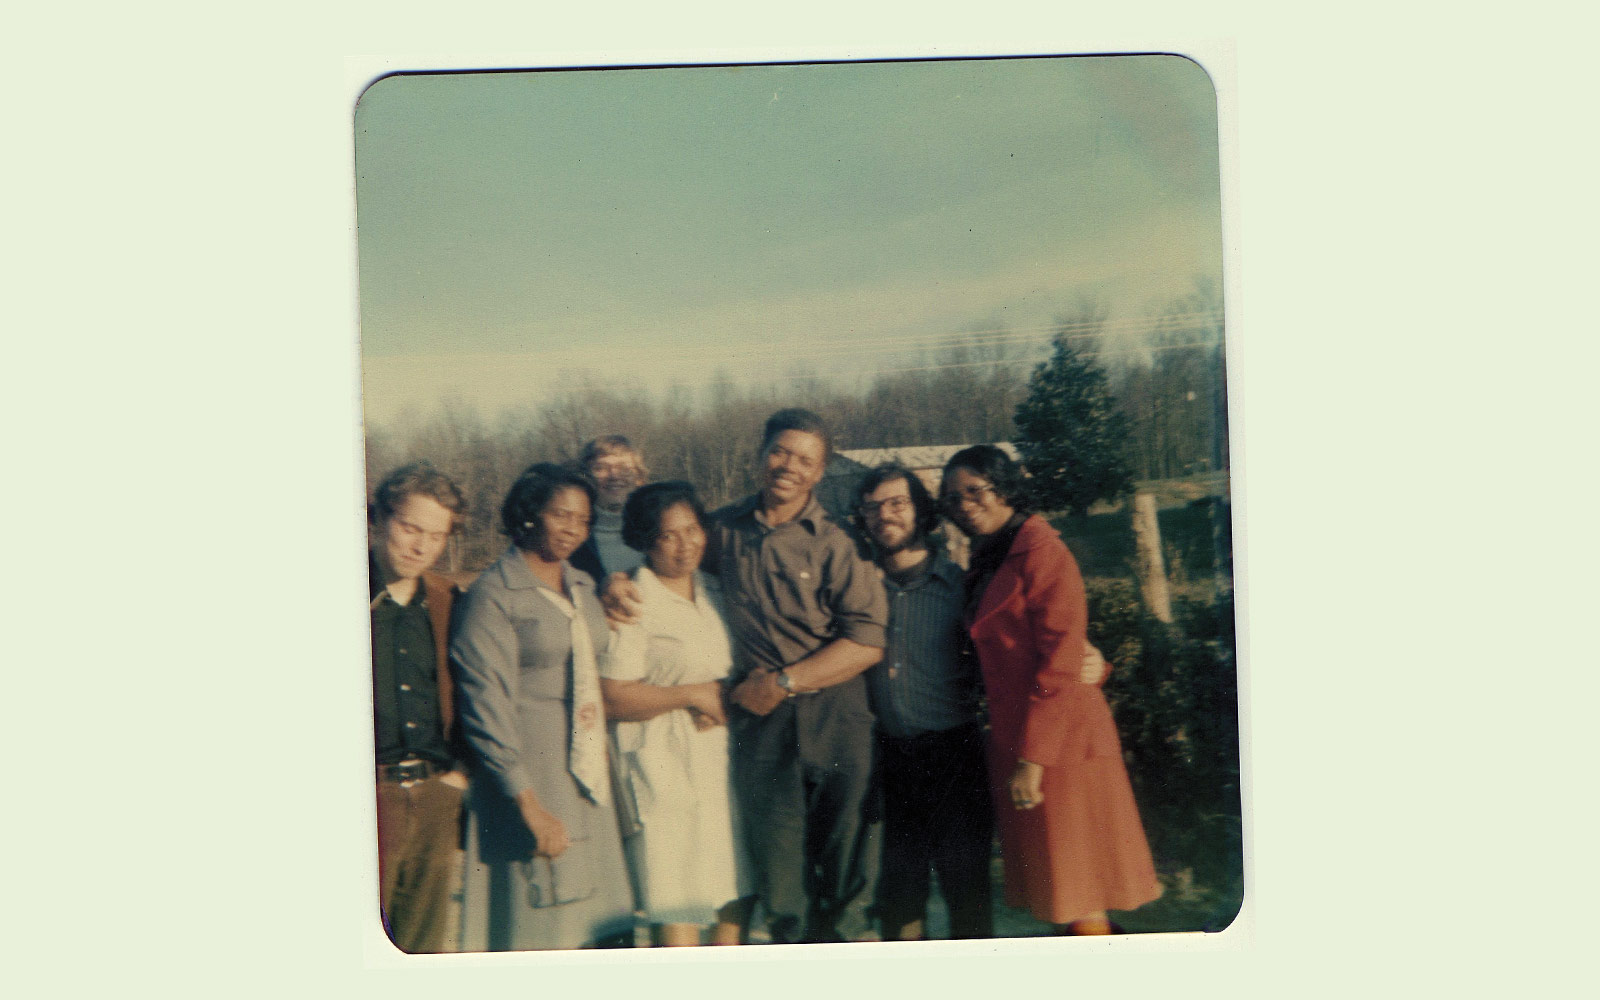 Dean Hansell (second from right) poses with other workcamp volunteers and a group of Tennessee locals. After graduating from Denison in 1974, he returned to the workcamps as a law student to teach classes on civil rights law and legal right…